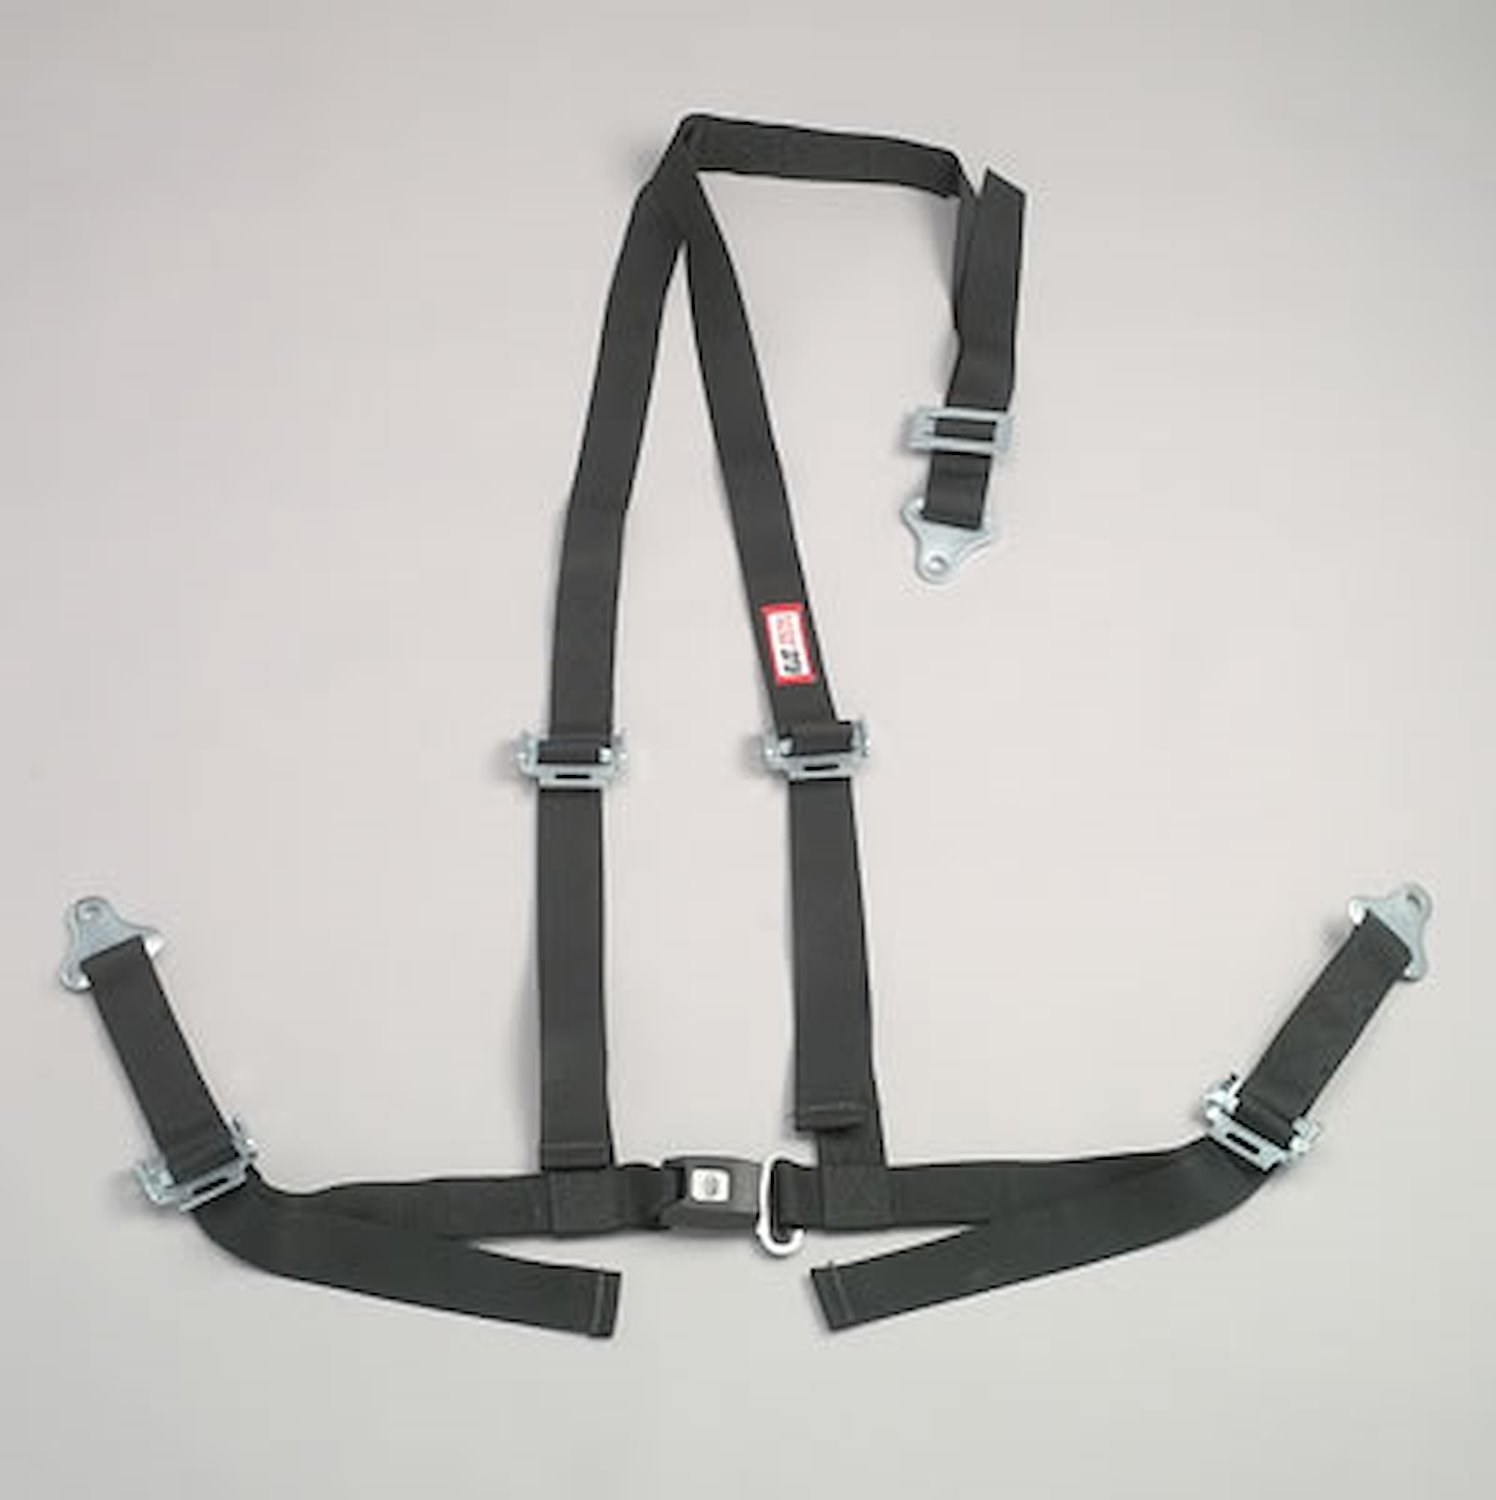 NON-SFI B&T HARNESS 2 PULL UP Lap Belt SNAP 2 S. H. Individual ROLL BAR Mount WRAP/SNAP w/STERNUM STRAP GRAY